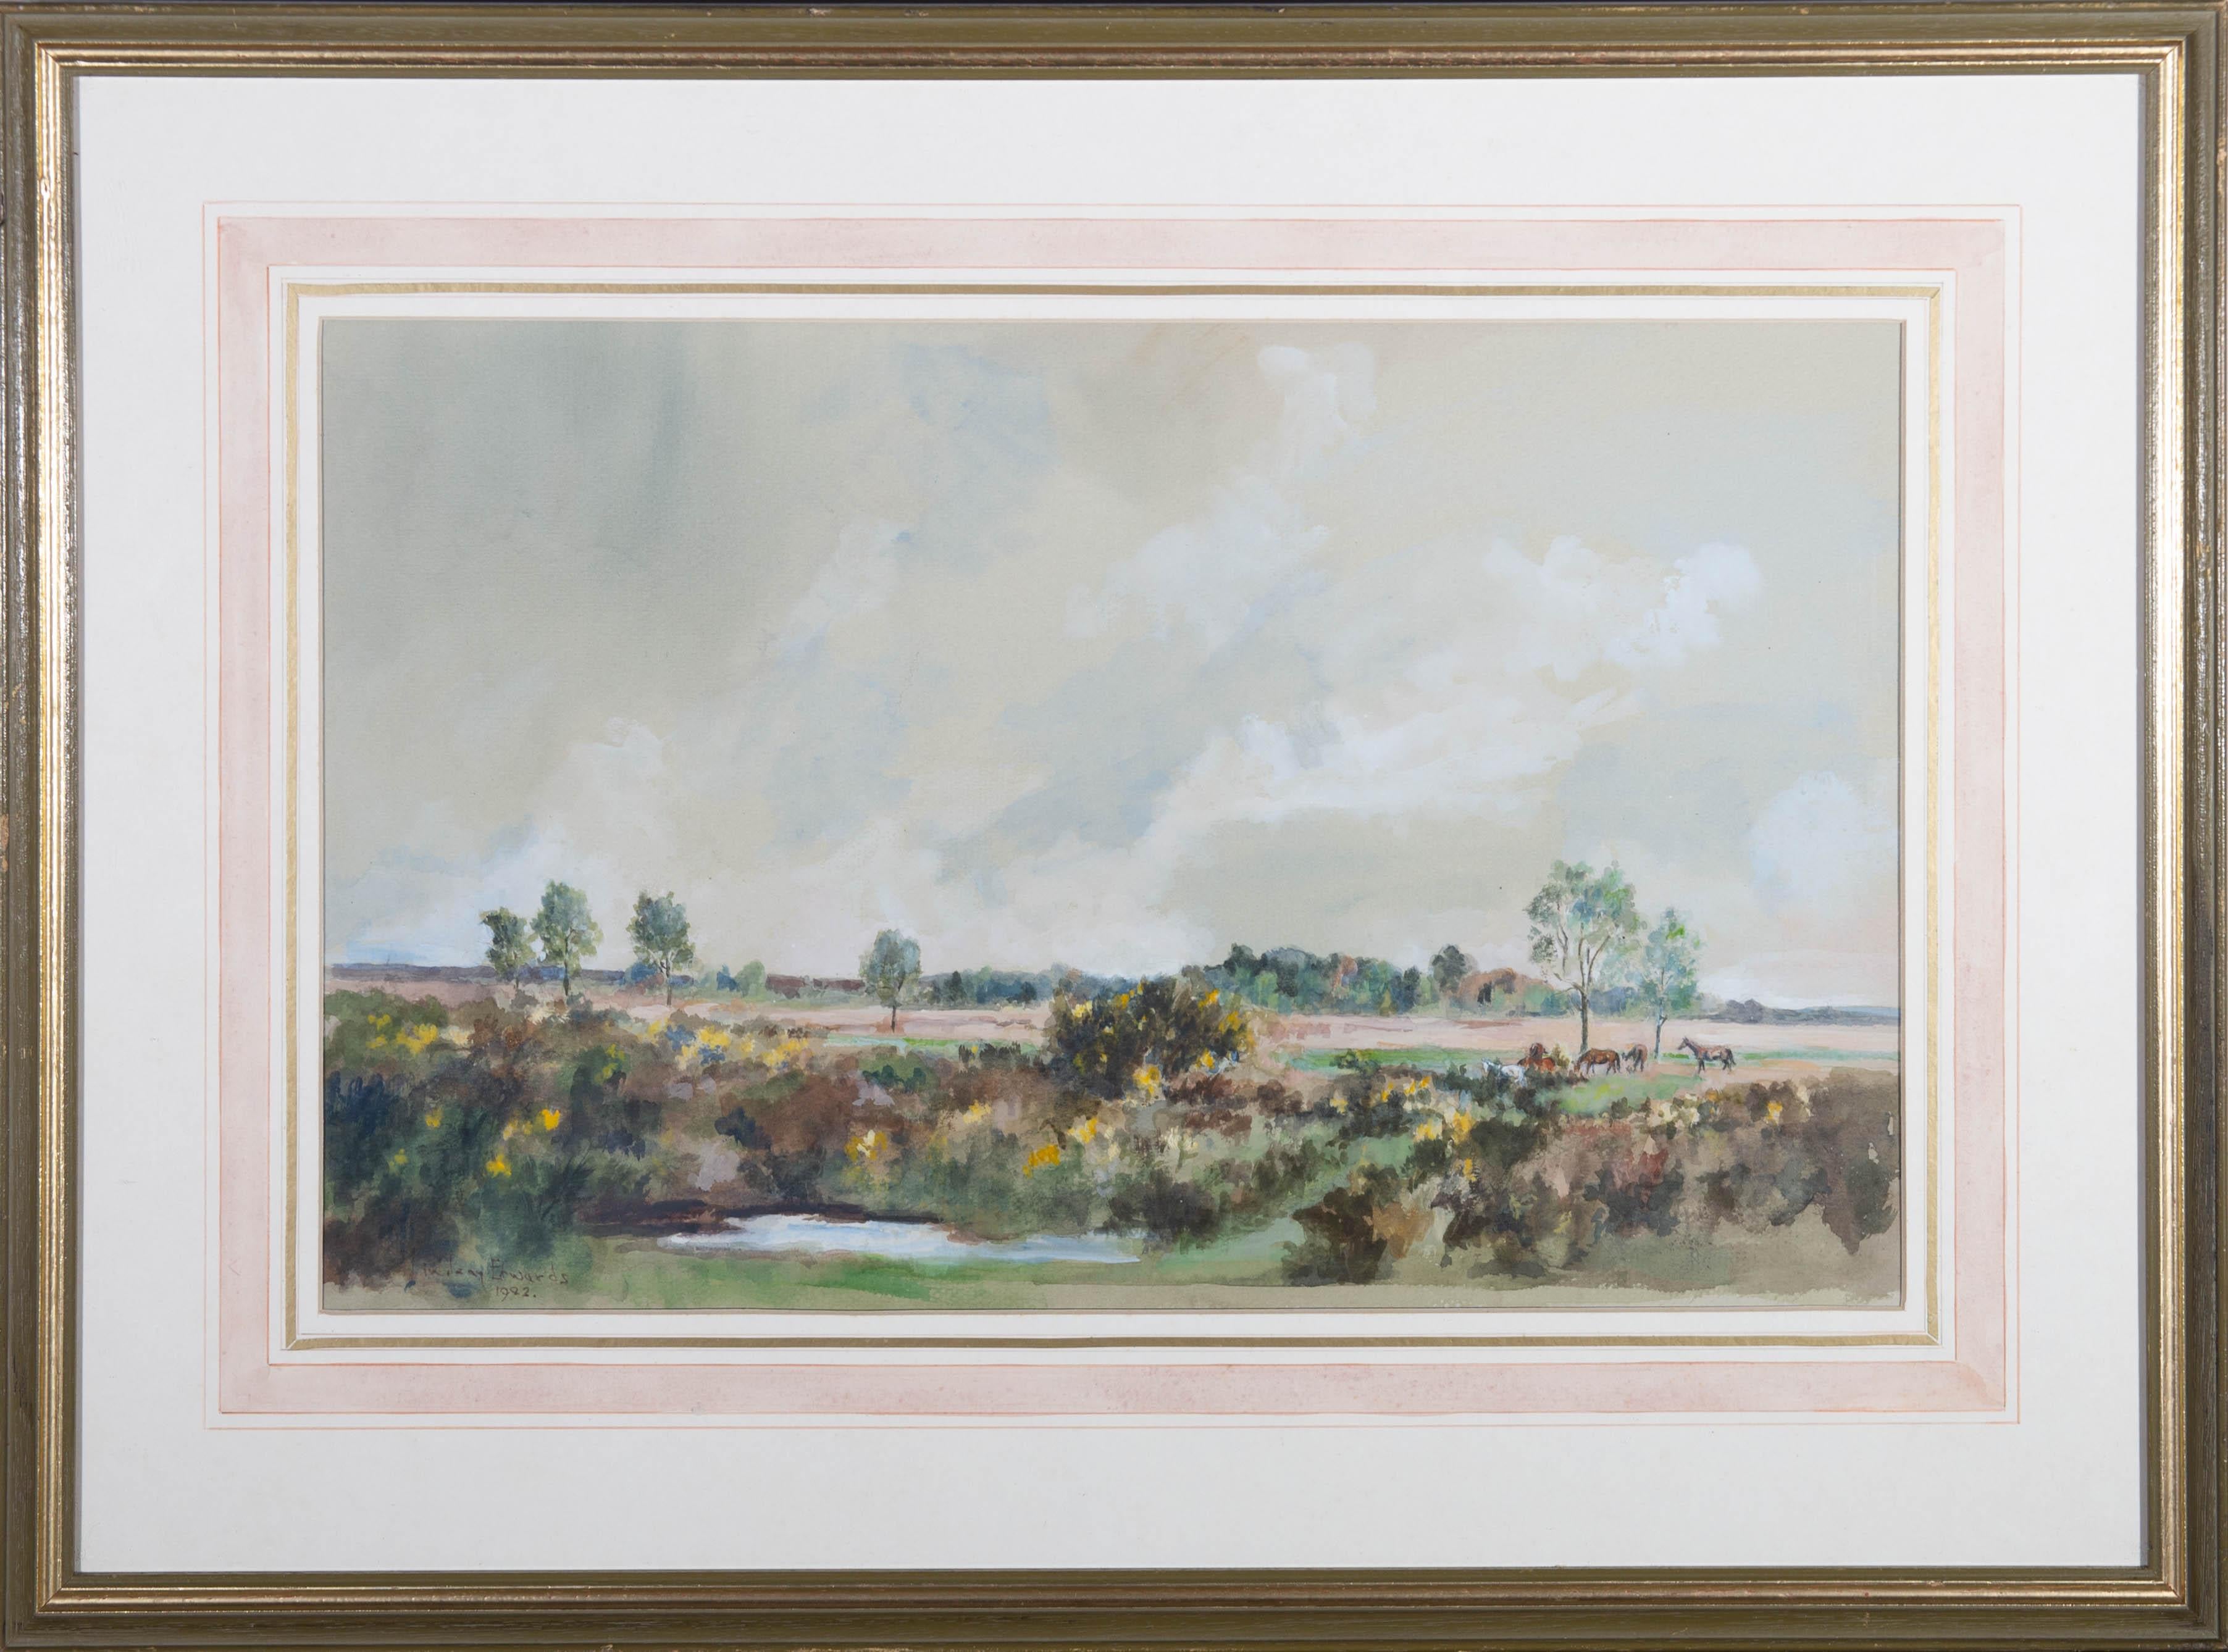 A charming watercolour scene of Deadman Hill in the New Forest, In it we can see a small lake surrounded by shrubbery along with some horses in the distance enjoying the time in the sunshine. Well presented in a card mount and sleek frame. Signed